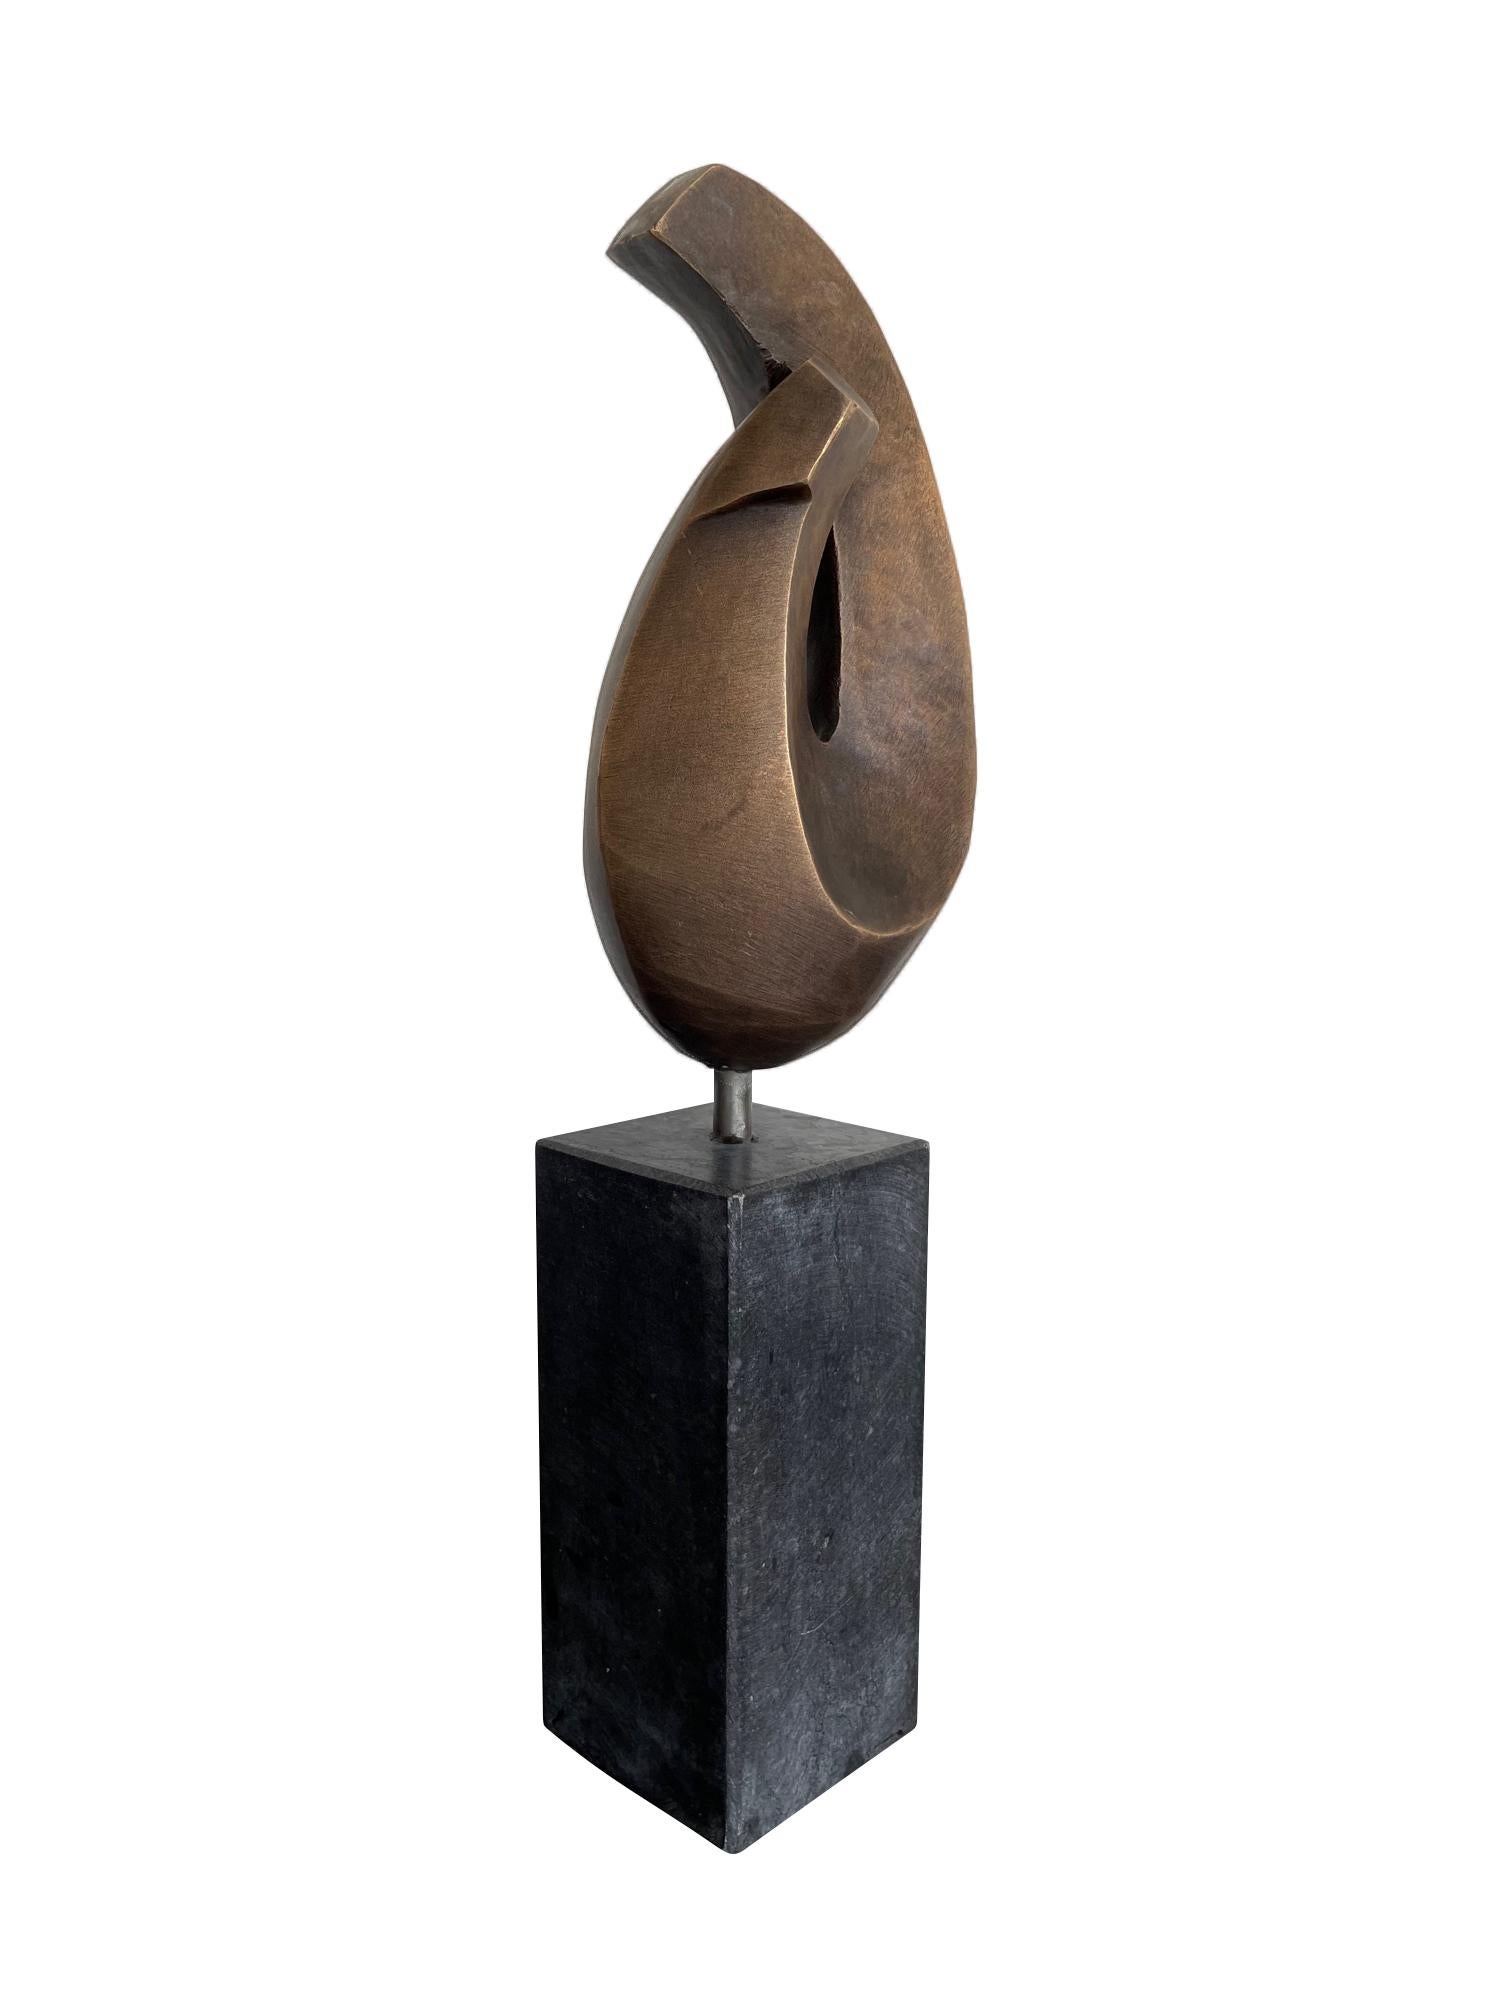 A French midcentury abstract bronze sculpture mounted on a black marble plinth.